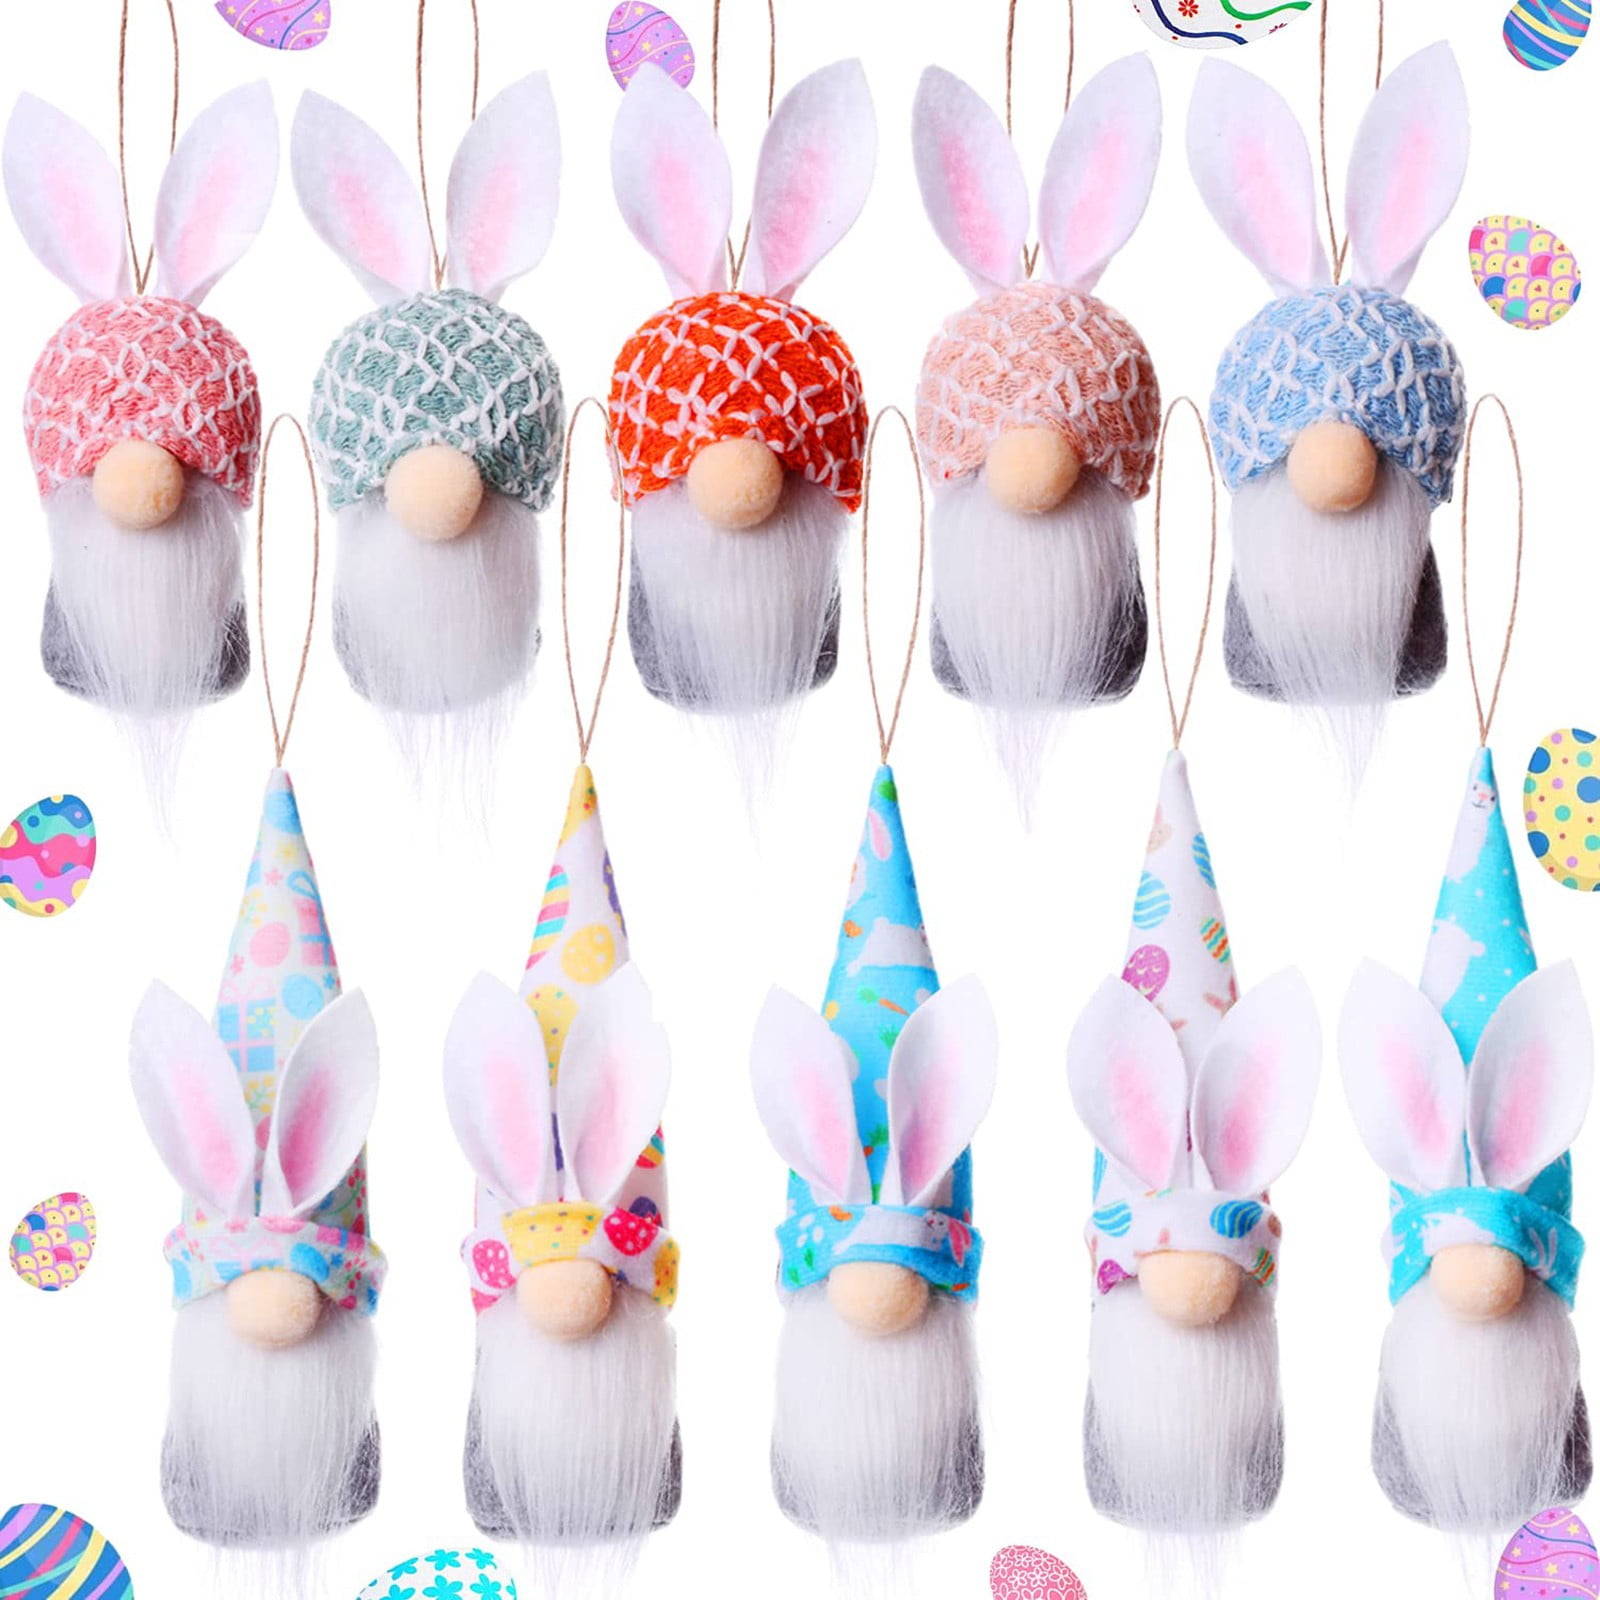 KANY Easter Ornaments Easter Tree Decorations And Ornaments Easter ...